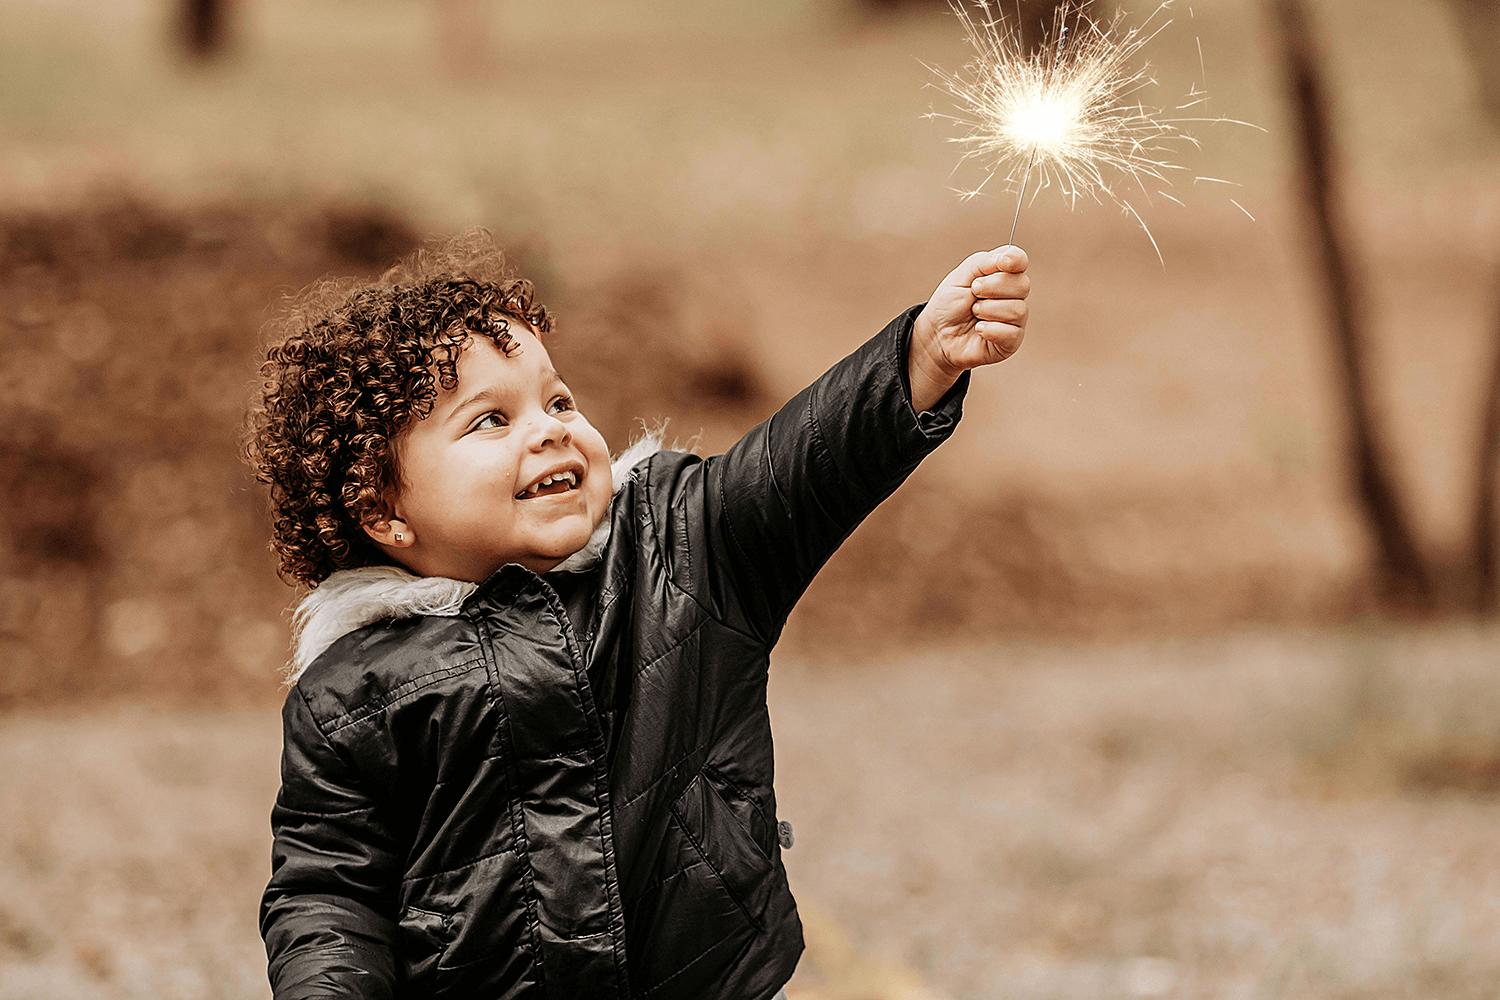 A child holding a sparkler to participate in new year superstitions.